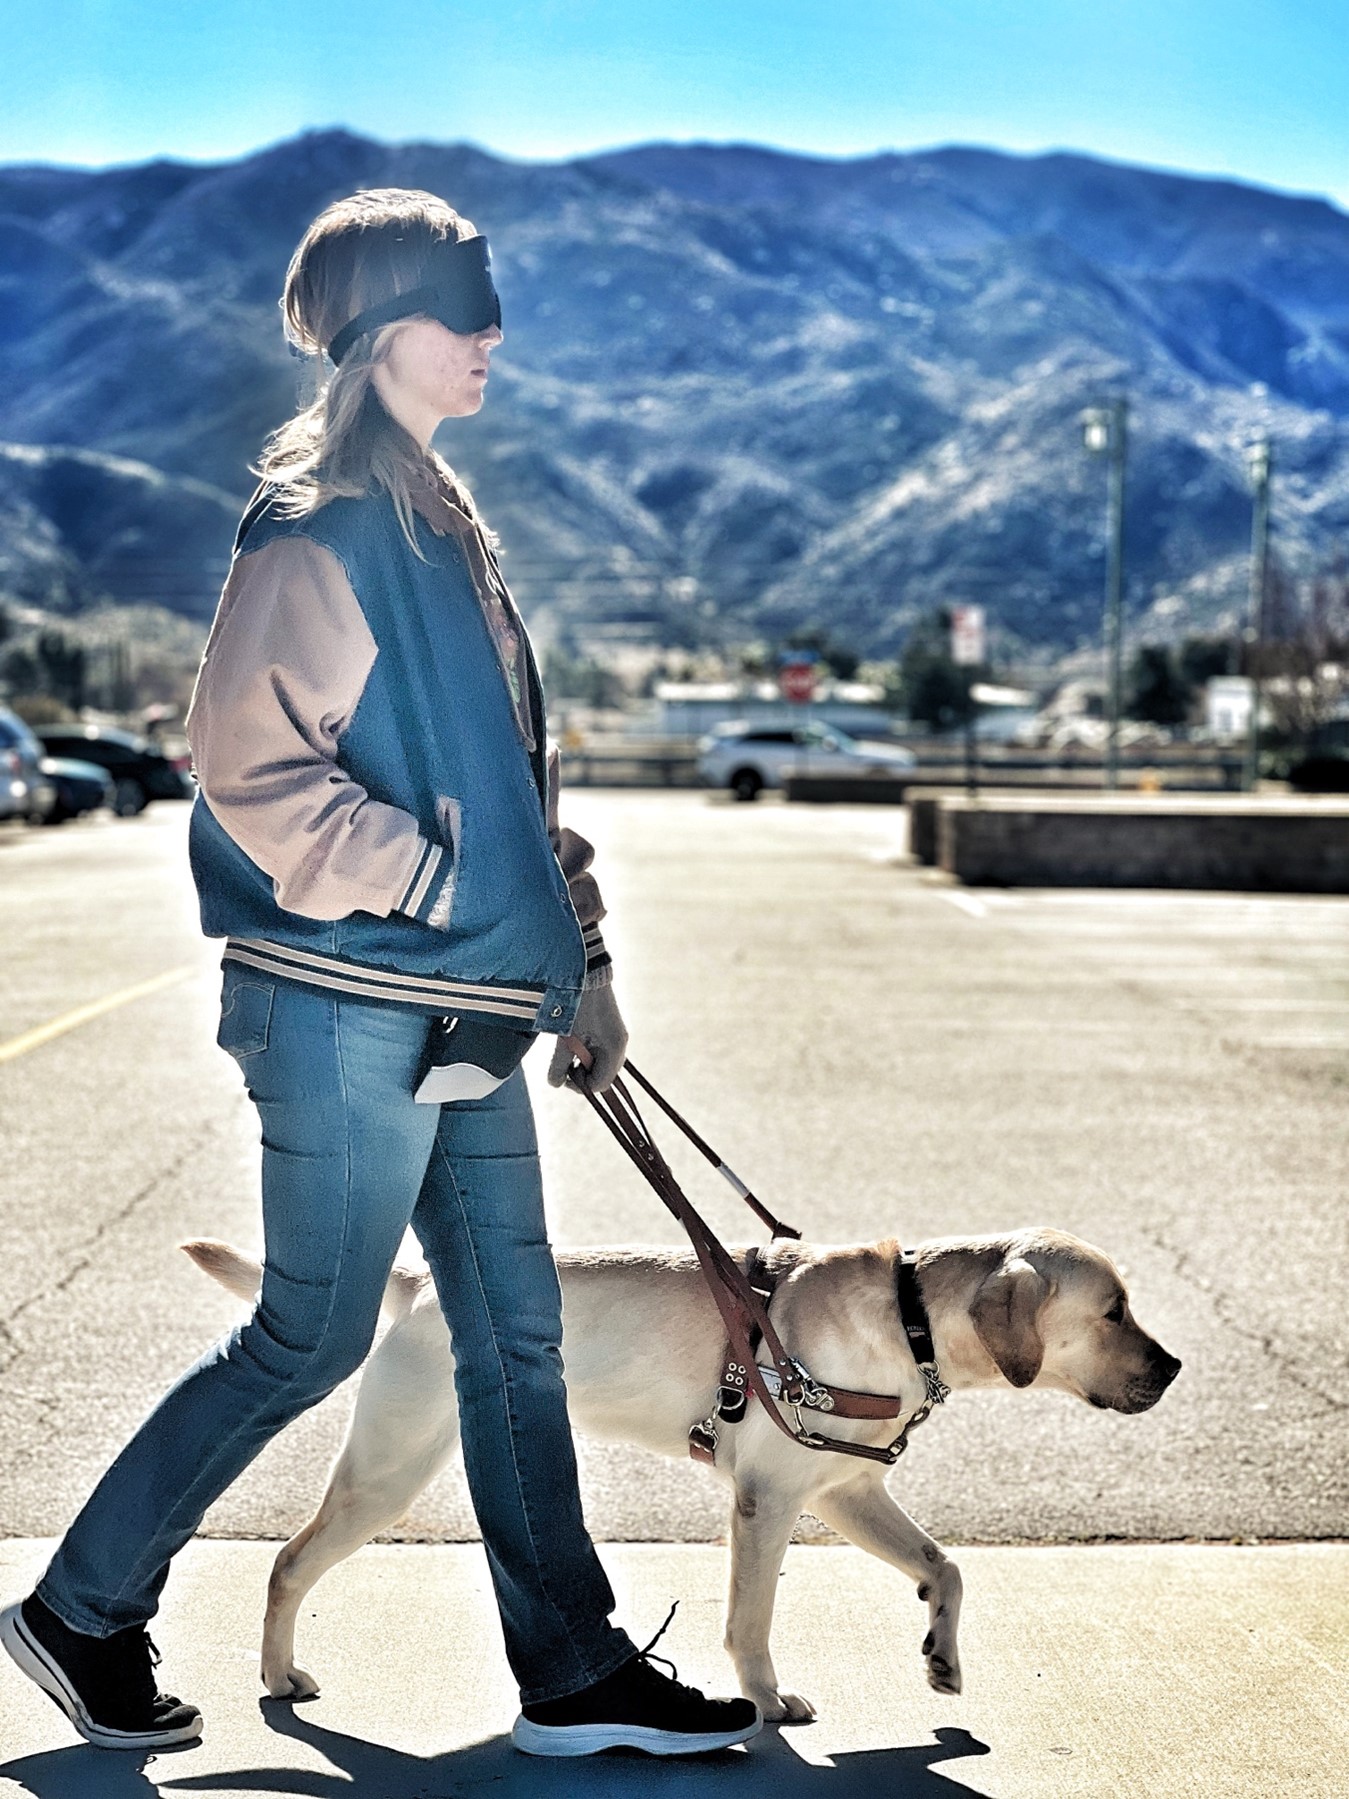 Woman wearing blindfold allows guide dog to take her across street